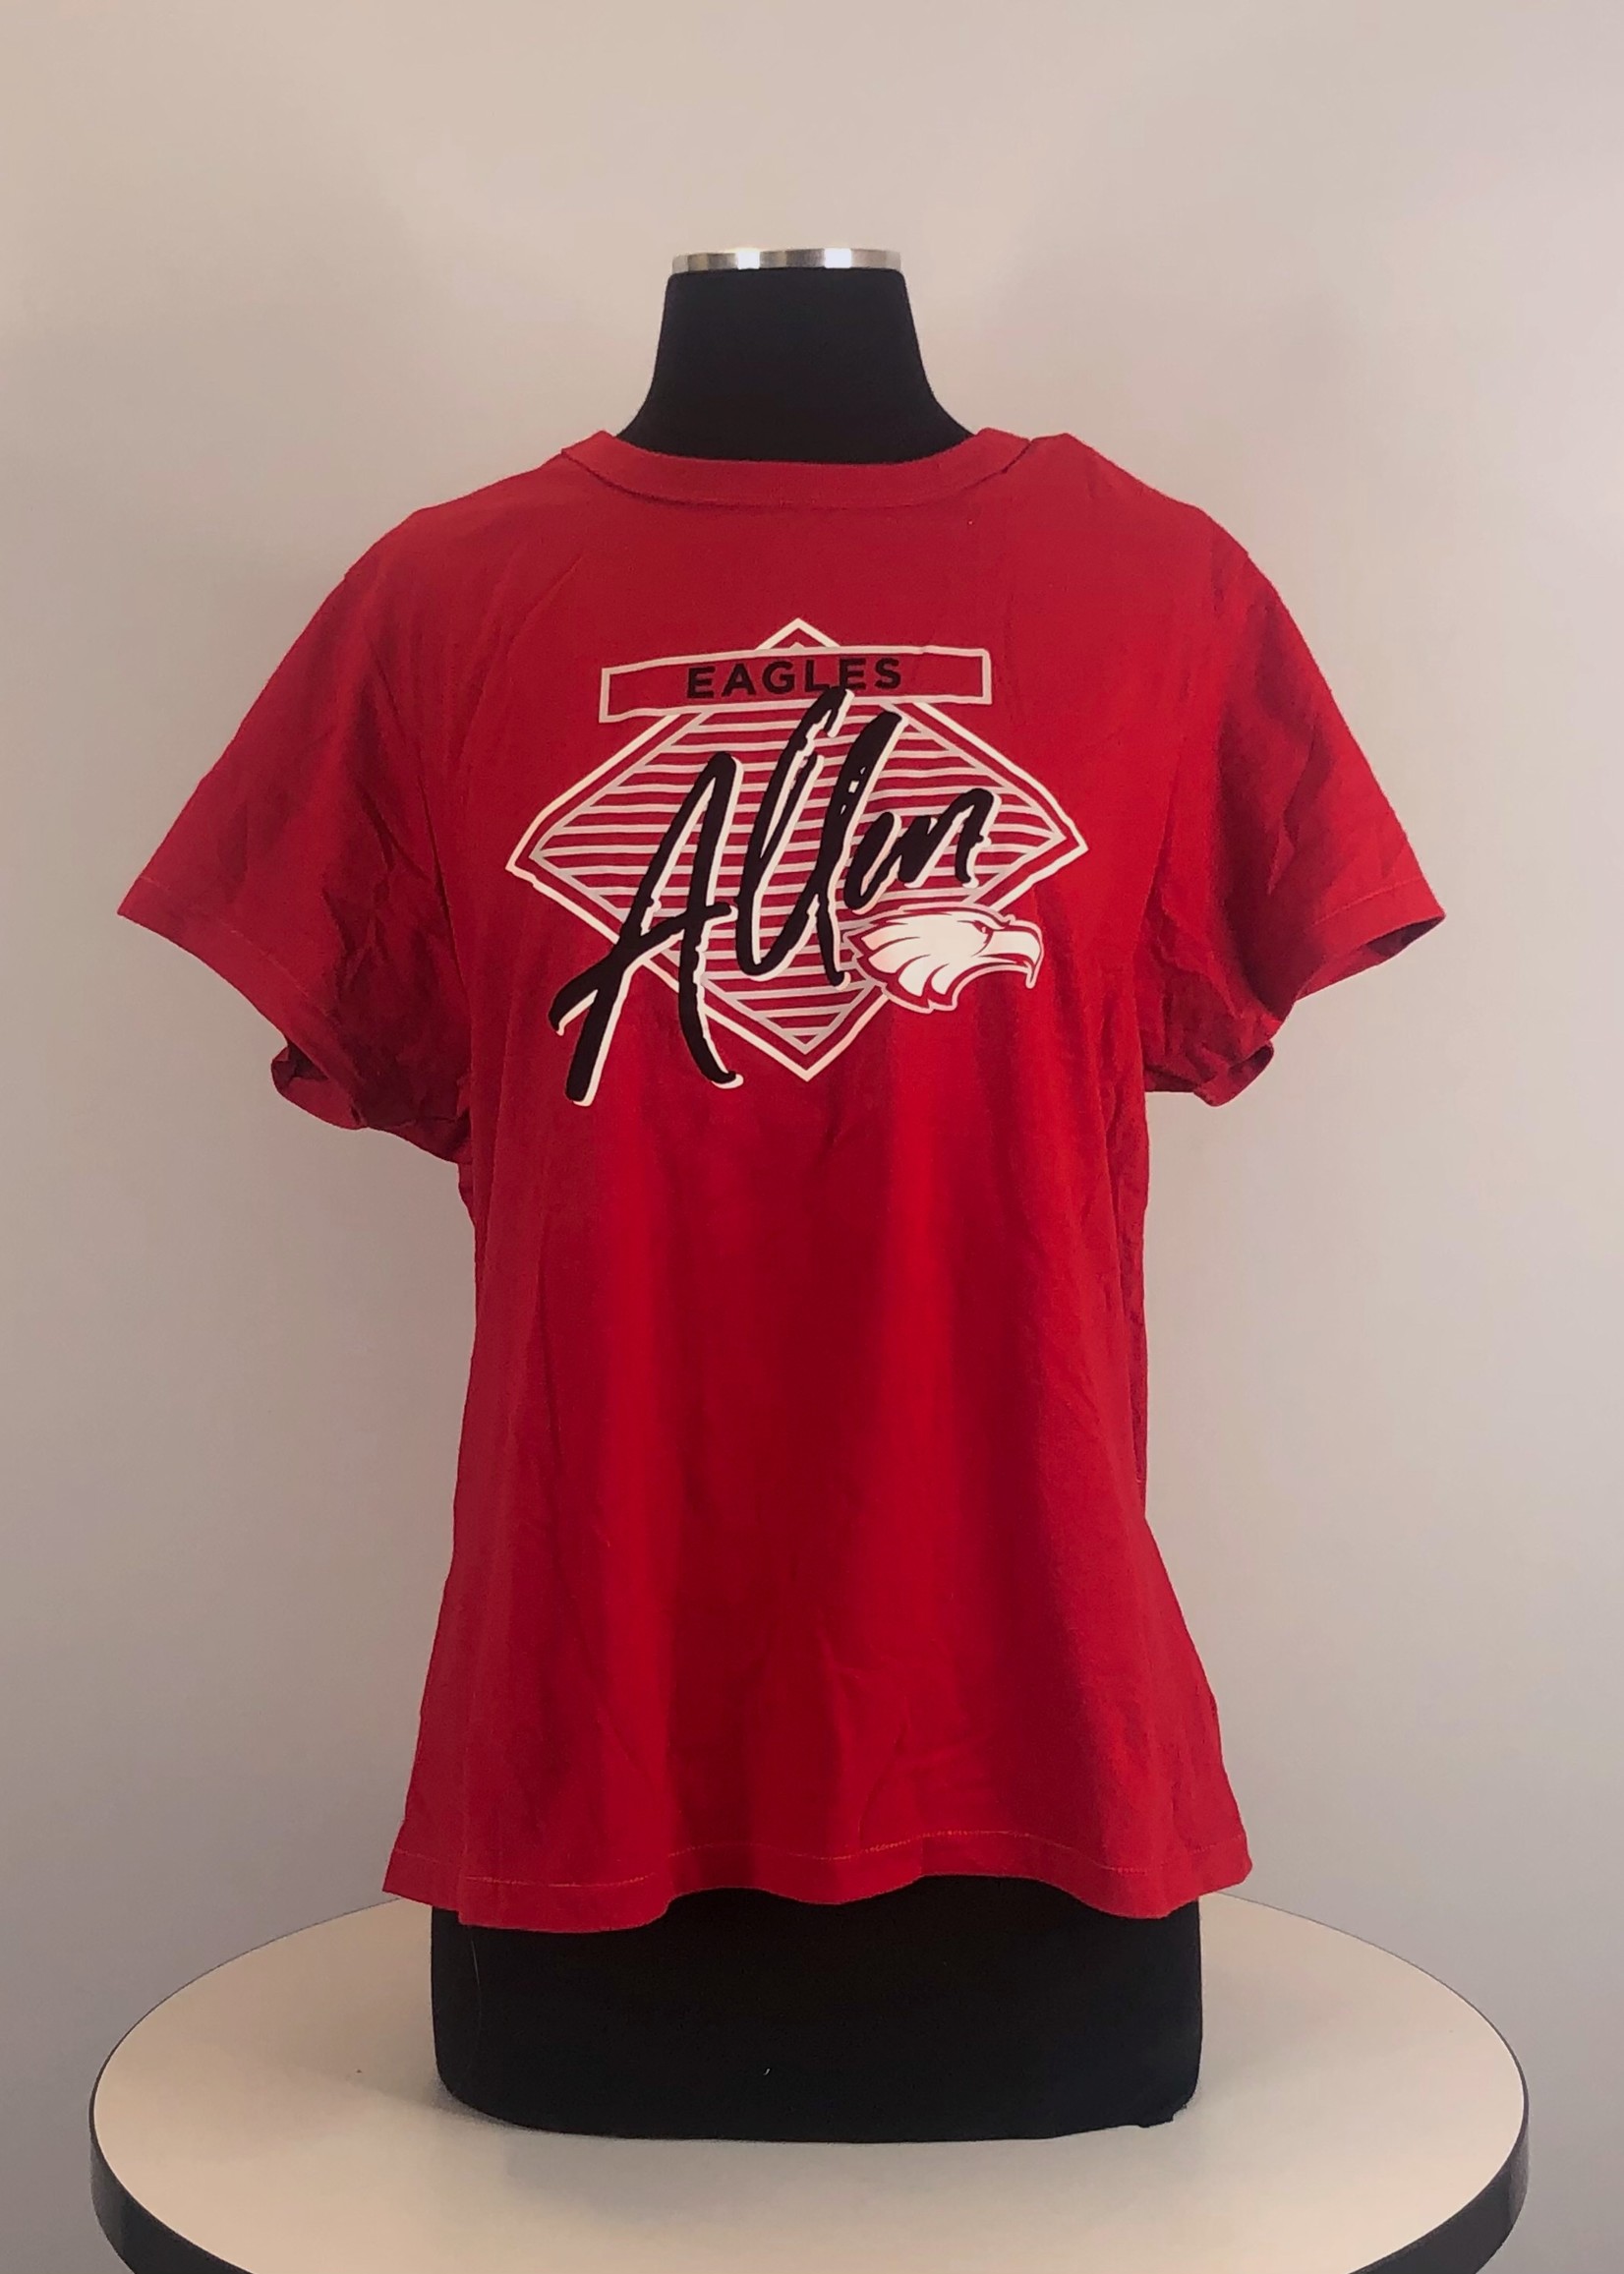 L2 Brands Re-Spin Tee